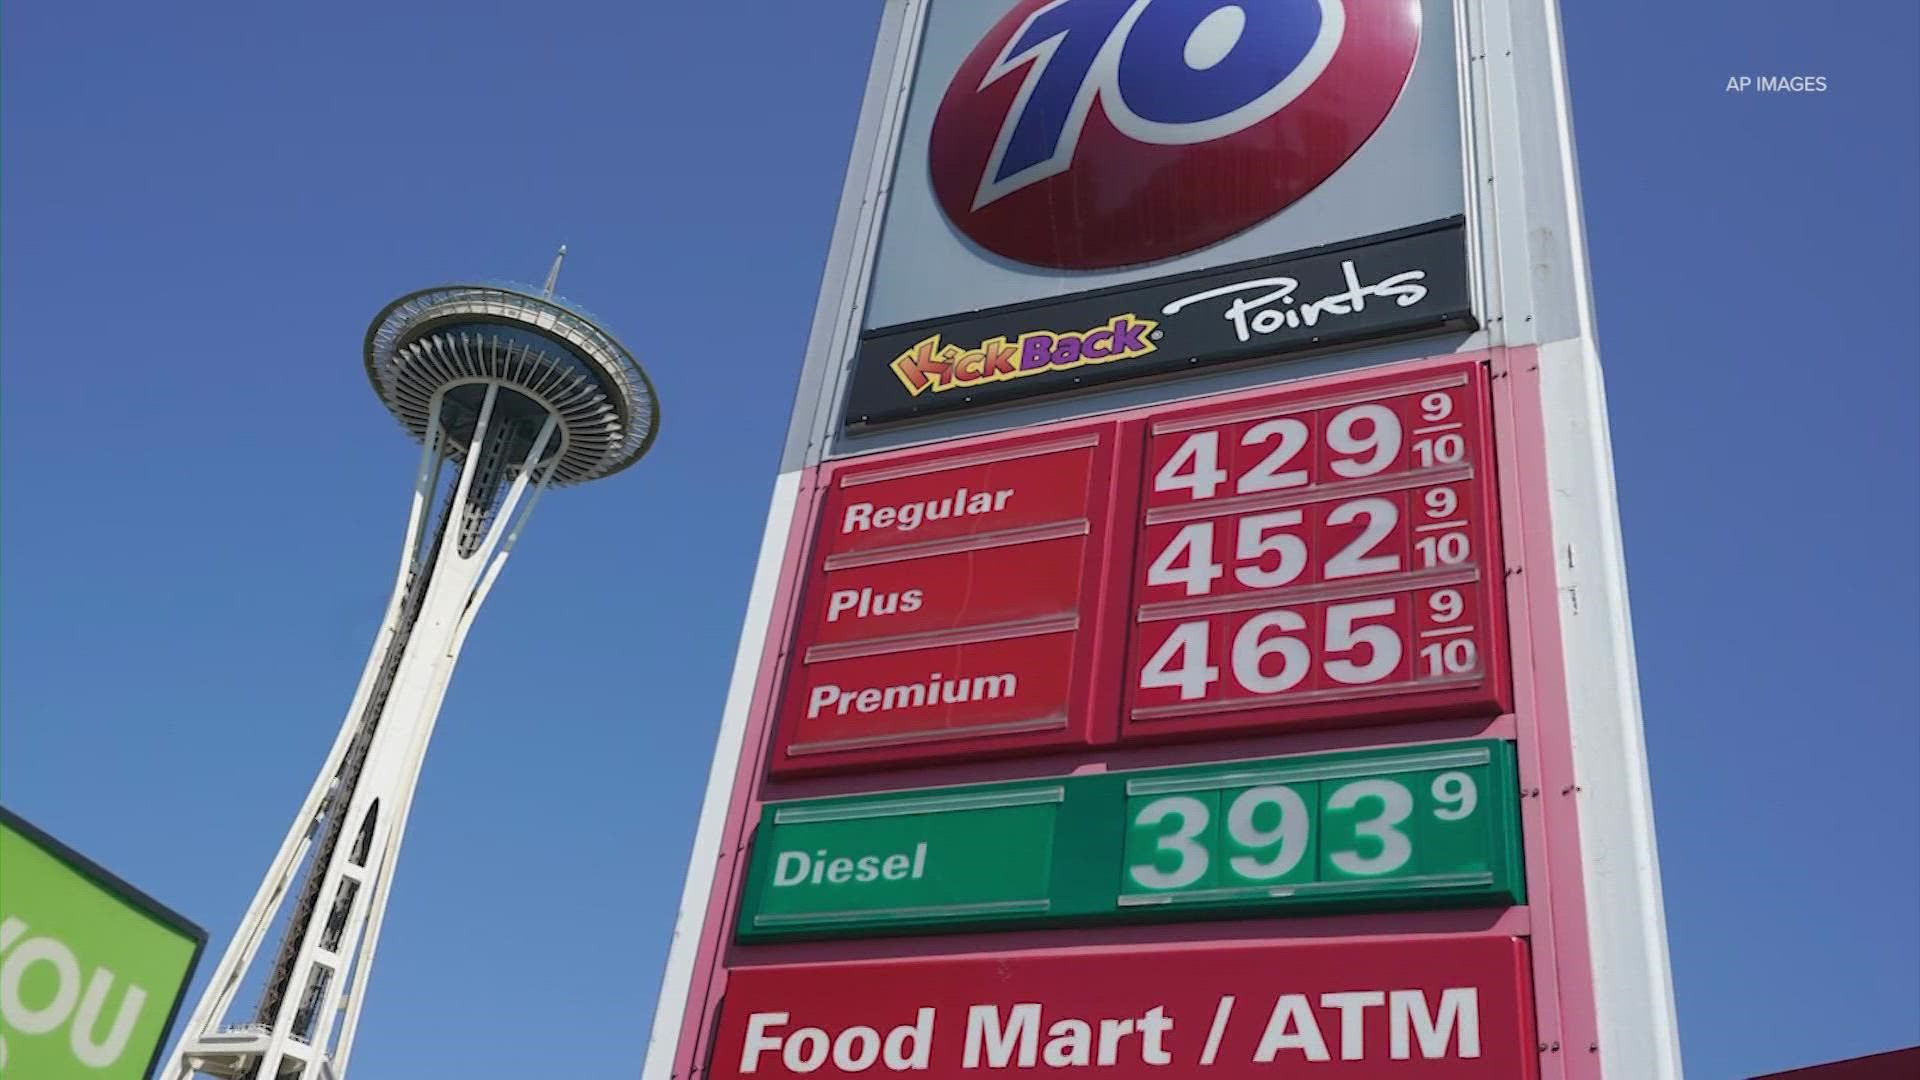 Historically, gas prices fall as cold weather approaches, so why are gas prices rising this year?